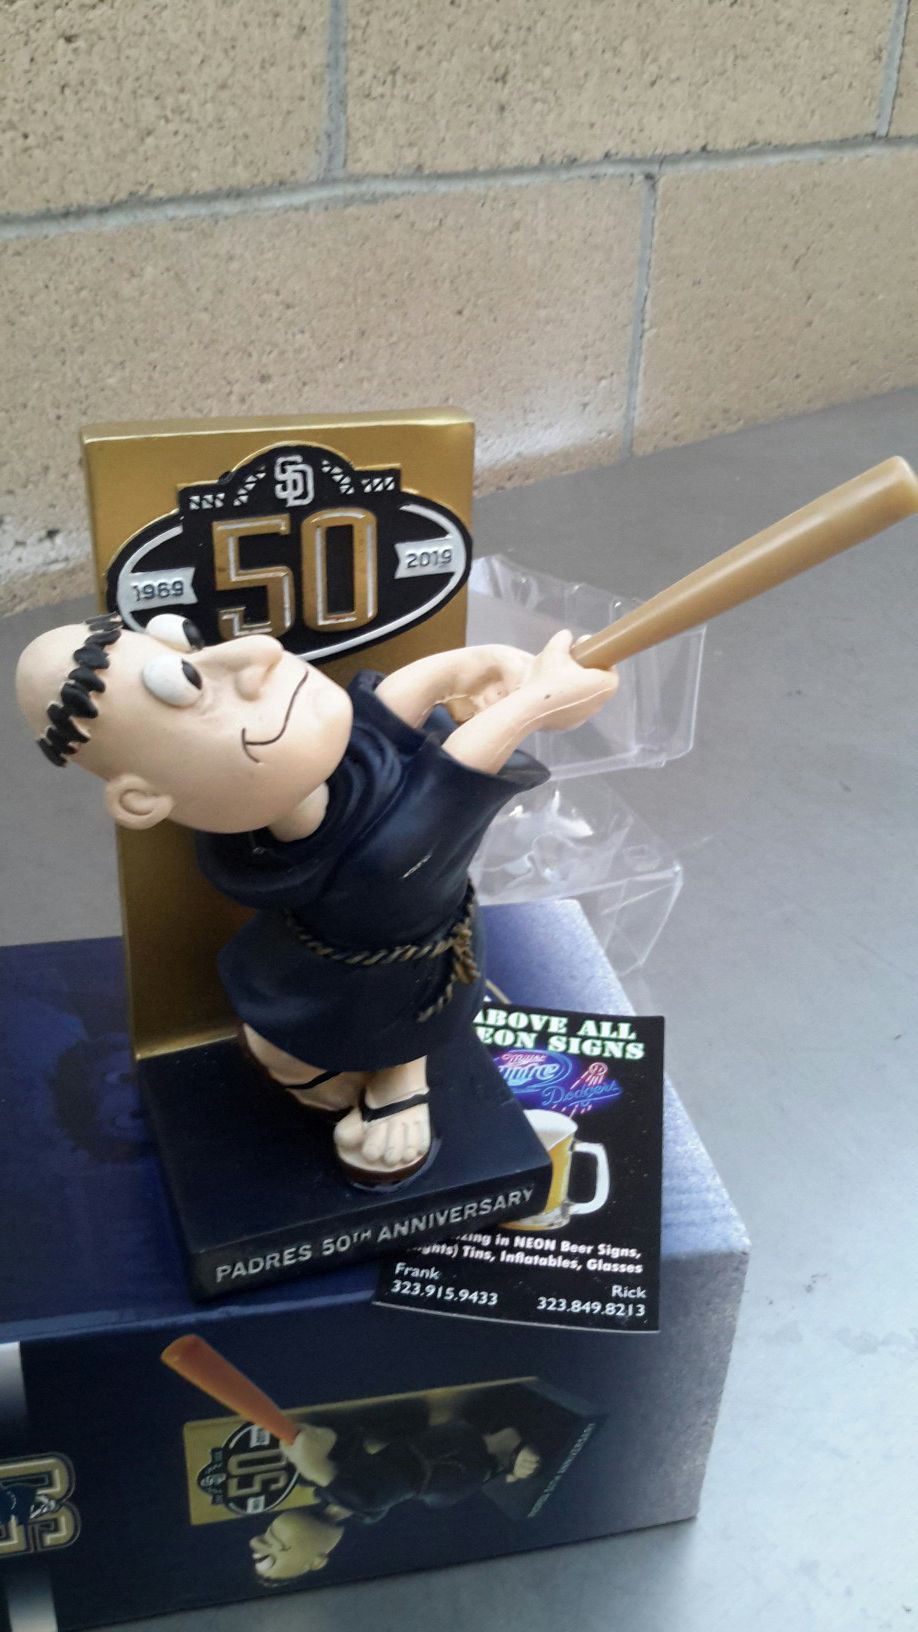 SD PADRES SWINGIN' FRIAR BOBBLEHEAD. ( ALSO PLENTY OF NEON SIGNS / LIGHTS AVAILABLE FOR SALE ). DODGERS BOBBLEHEADS AVAILABLE.